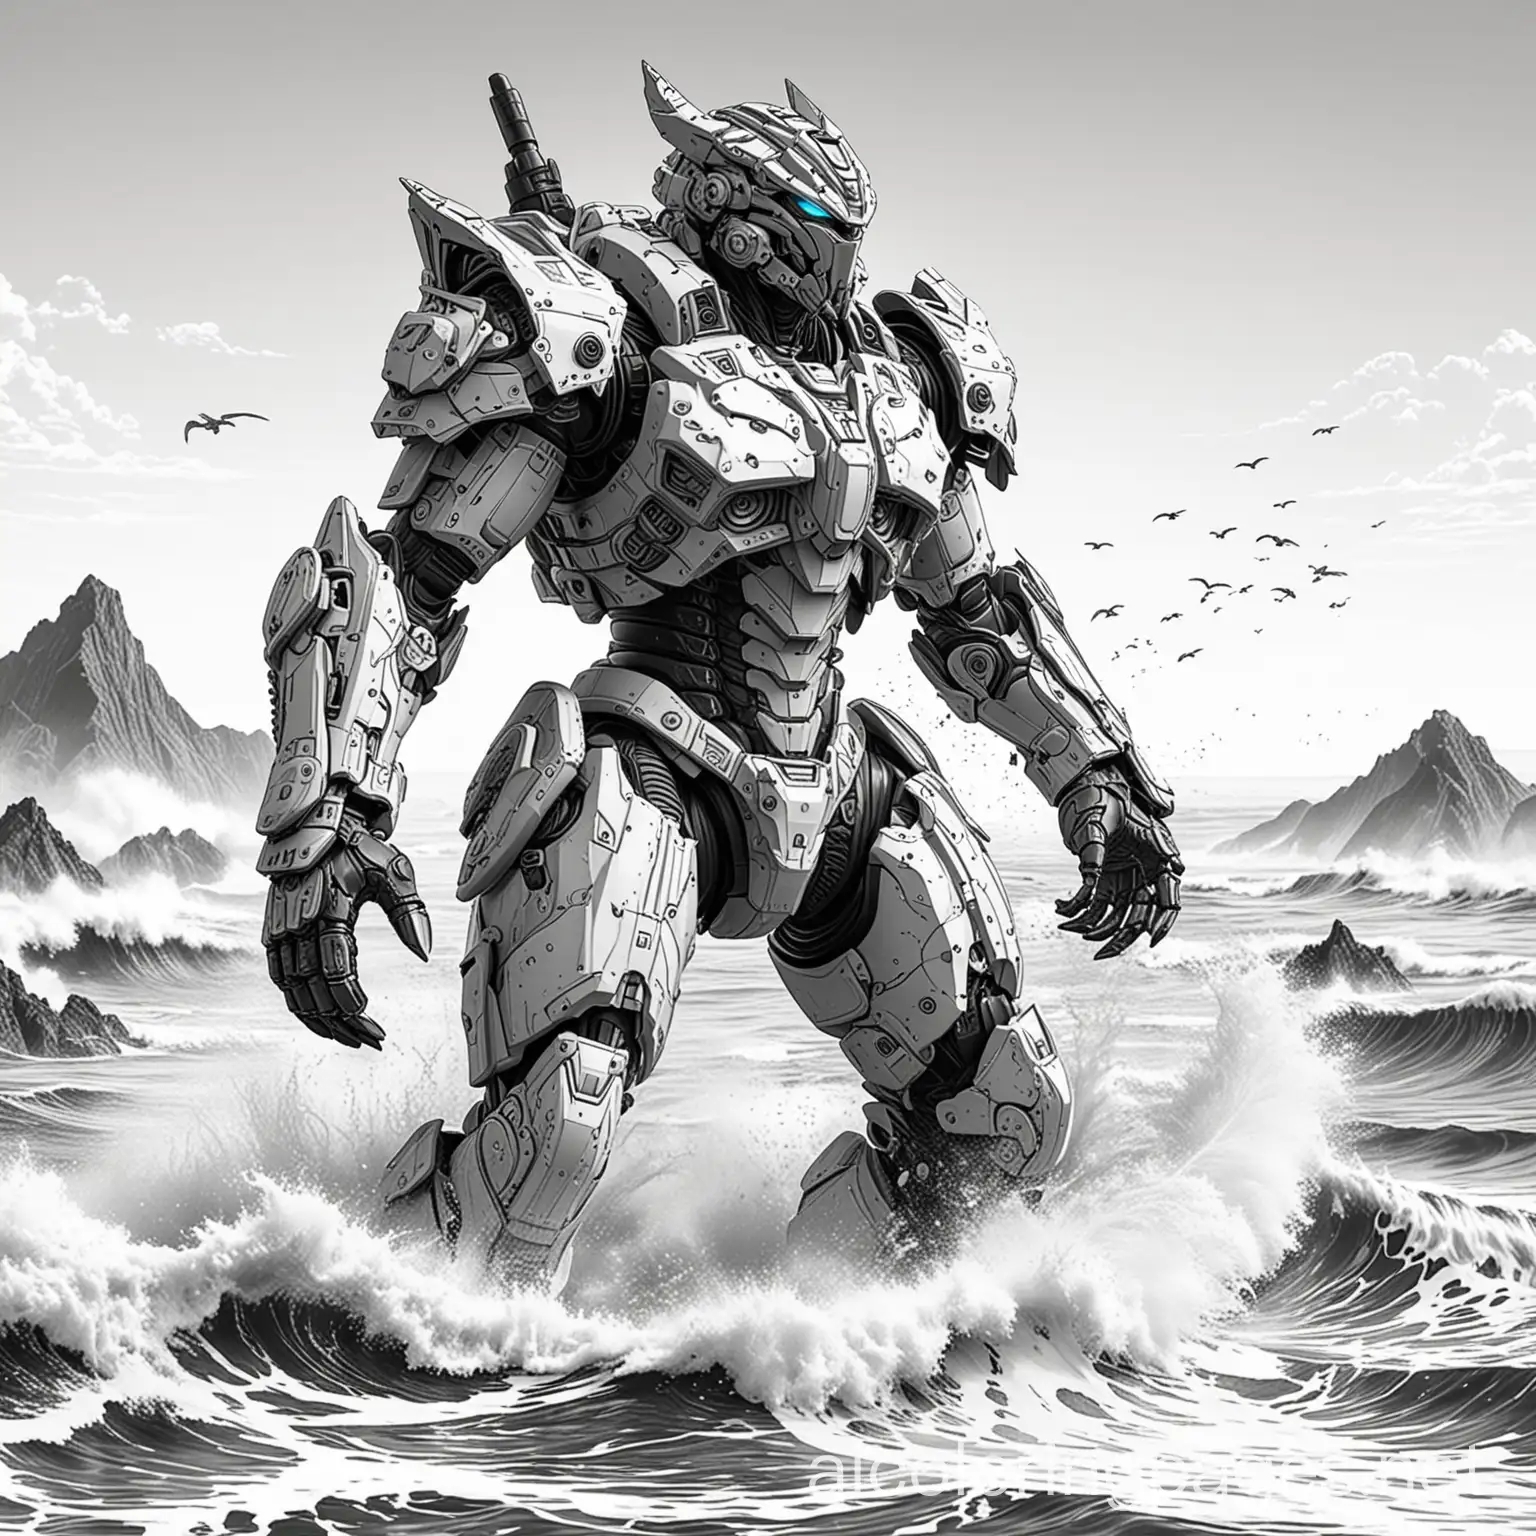 soldier wearing mecha armor, standing in the ocean, fighting with a kaiju, Coloring Page, black and white, line art, white background, Simplicity, Ample White Space. The background of the coloring page is plain white to make it easy for young children to color within the lines. The outlines of all the subjects are easy to distinguish, making it simple for kids to color without too much difficulty